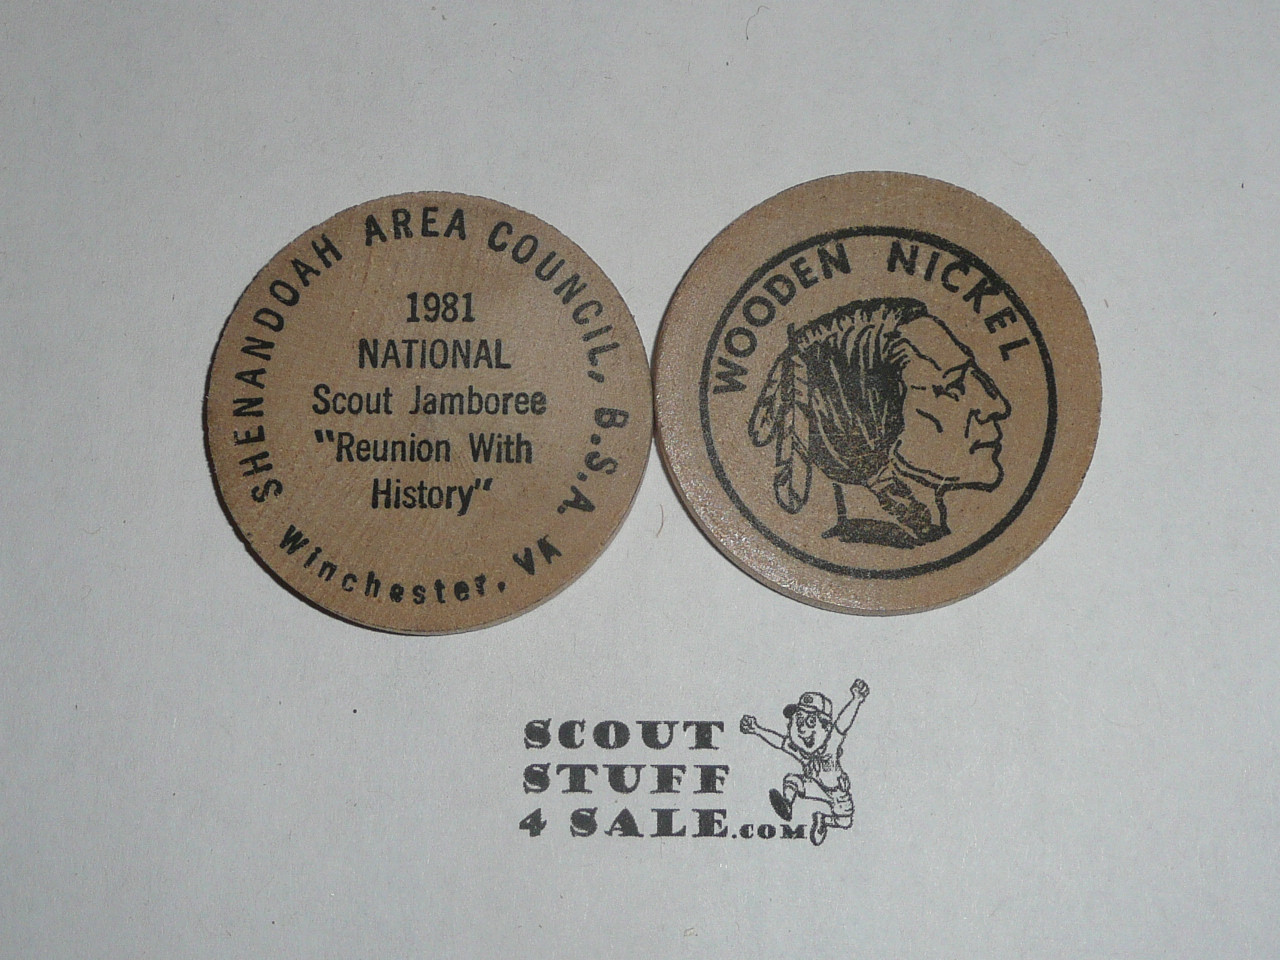 BSA WOODEN NICKEL…1981 NATIONAL SCOUT JAMBOREE…IN SEARCH OF HISTORY 